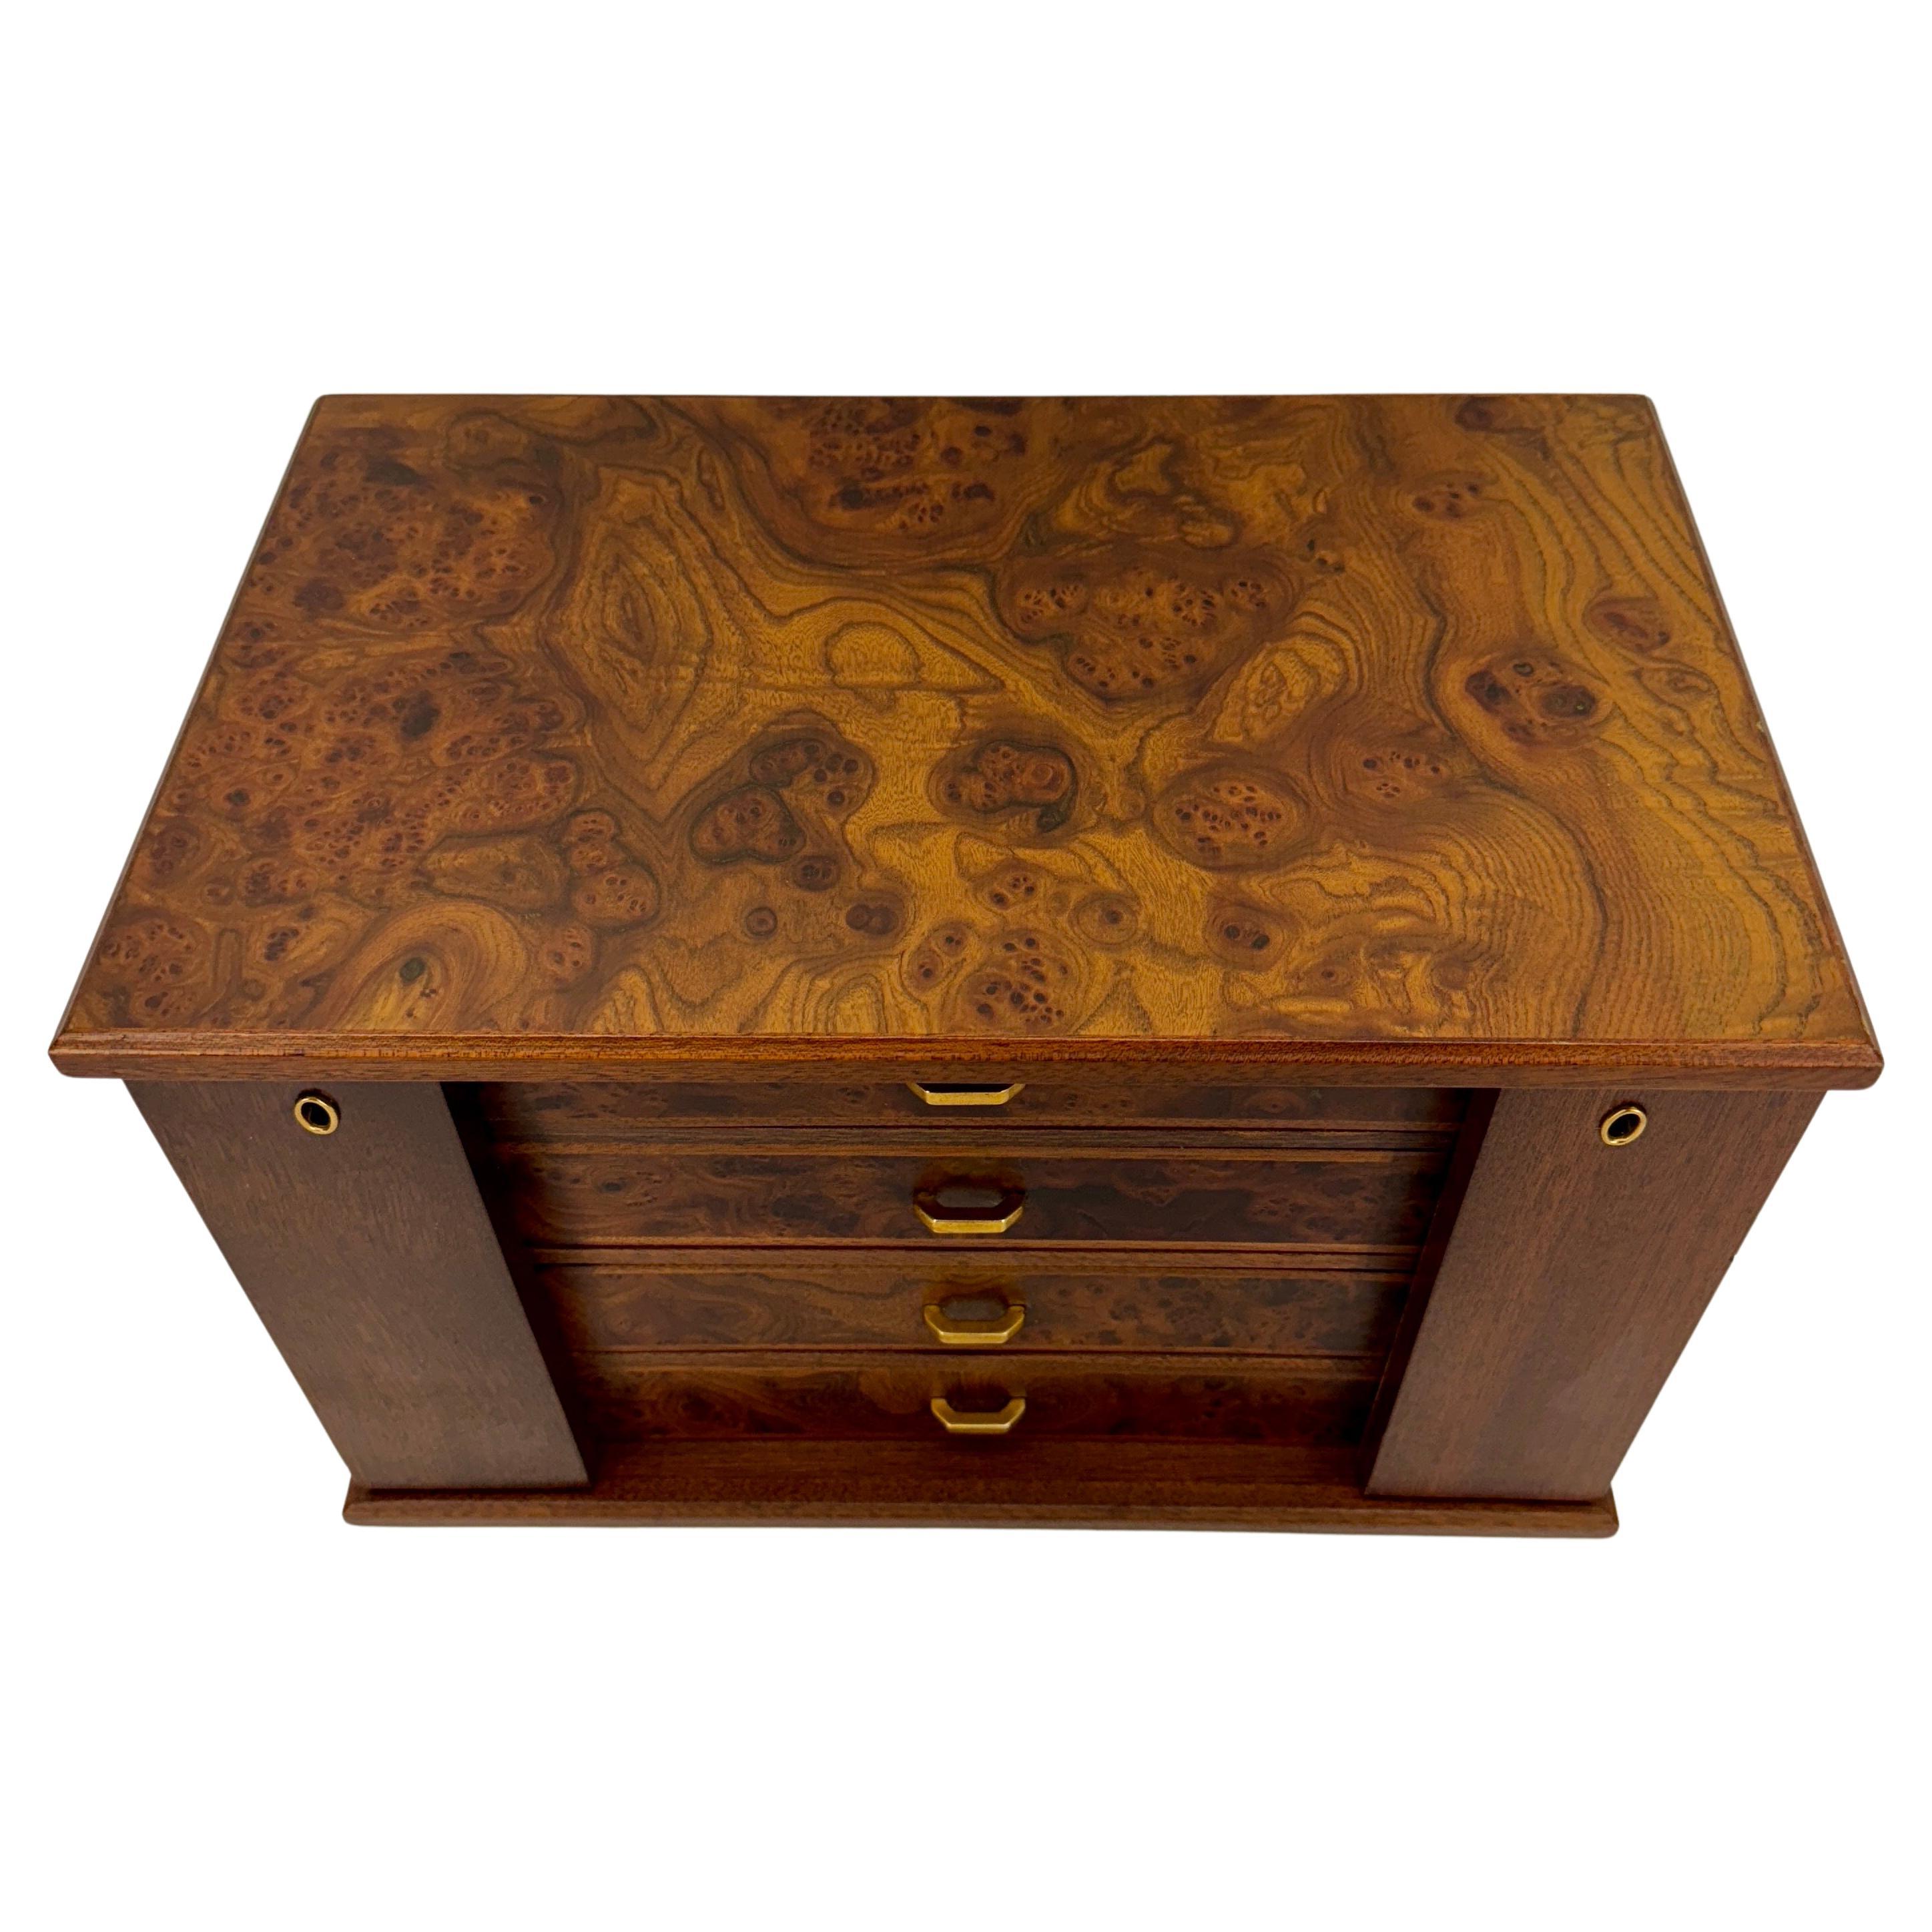 Large Italian Rectangular Burl Wood Jewelry Box With 4 Drawers For Sale 1